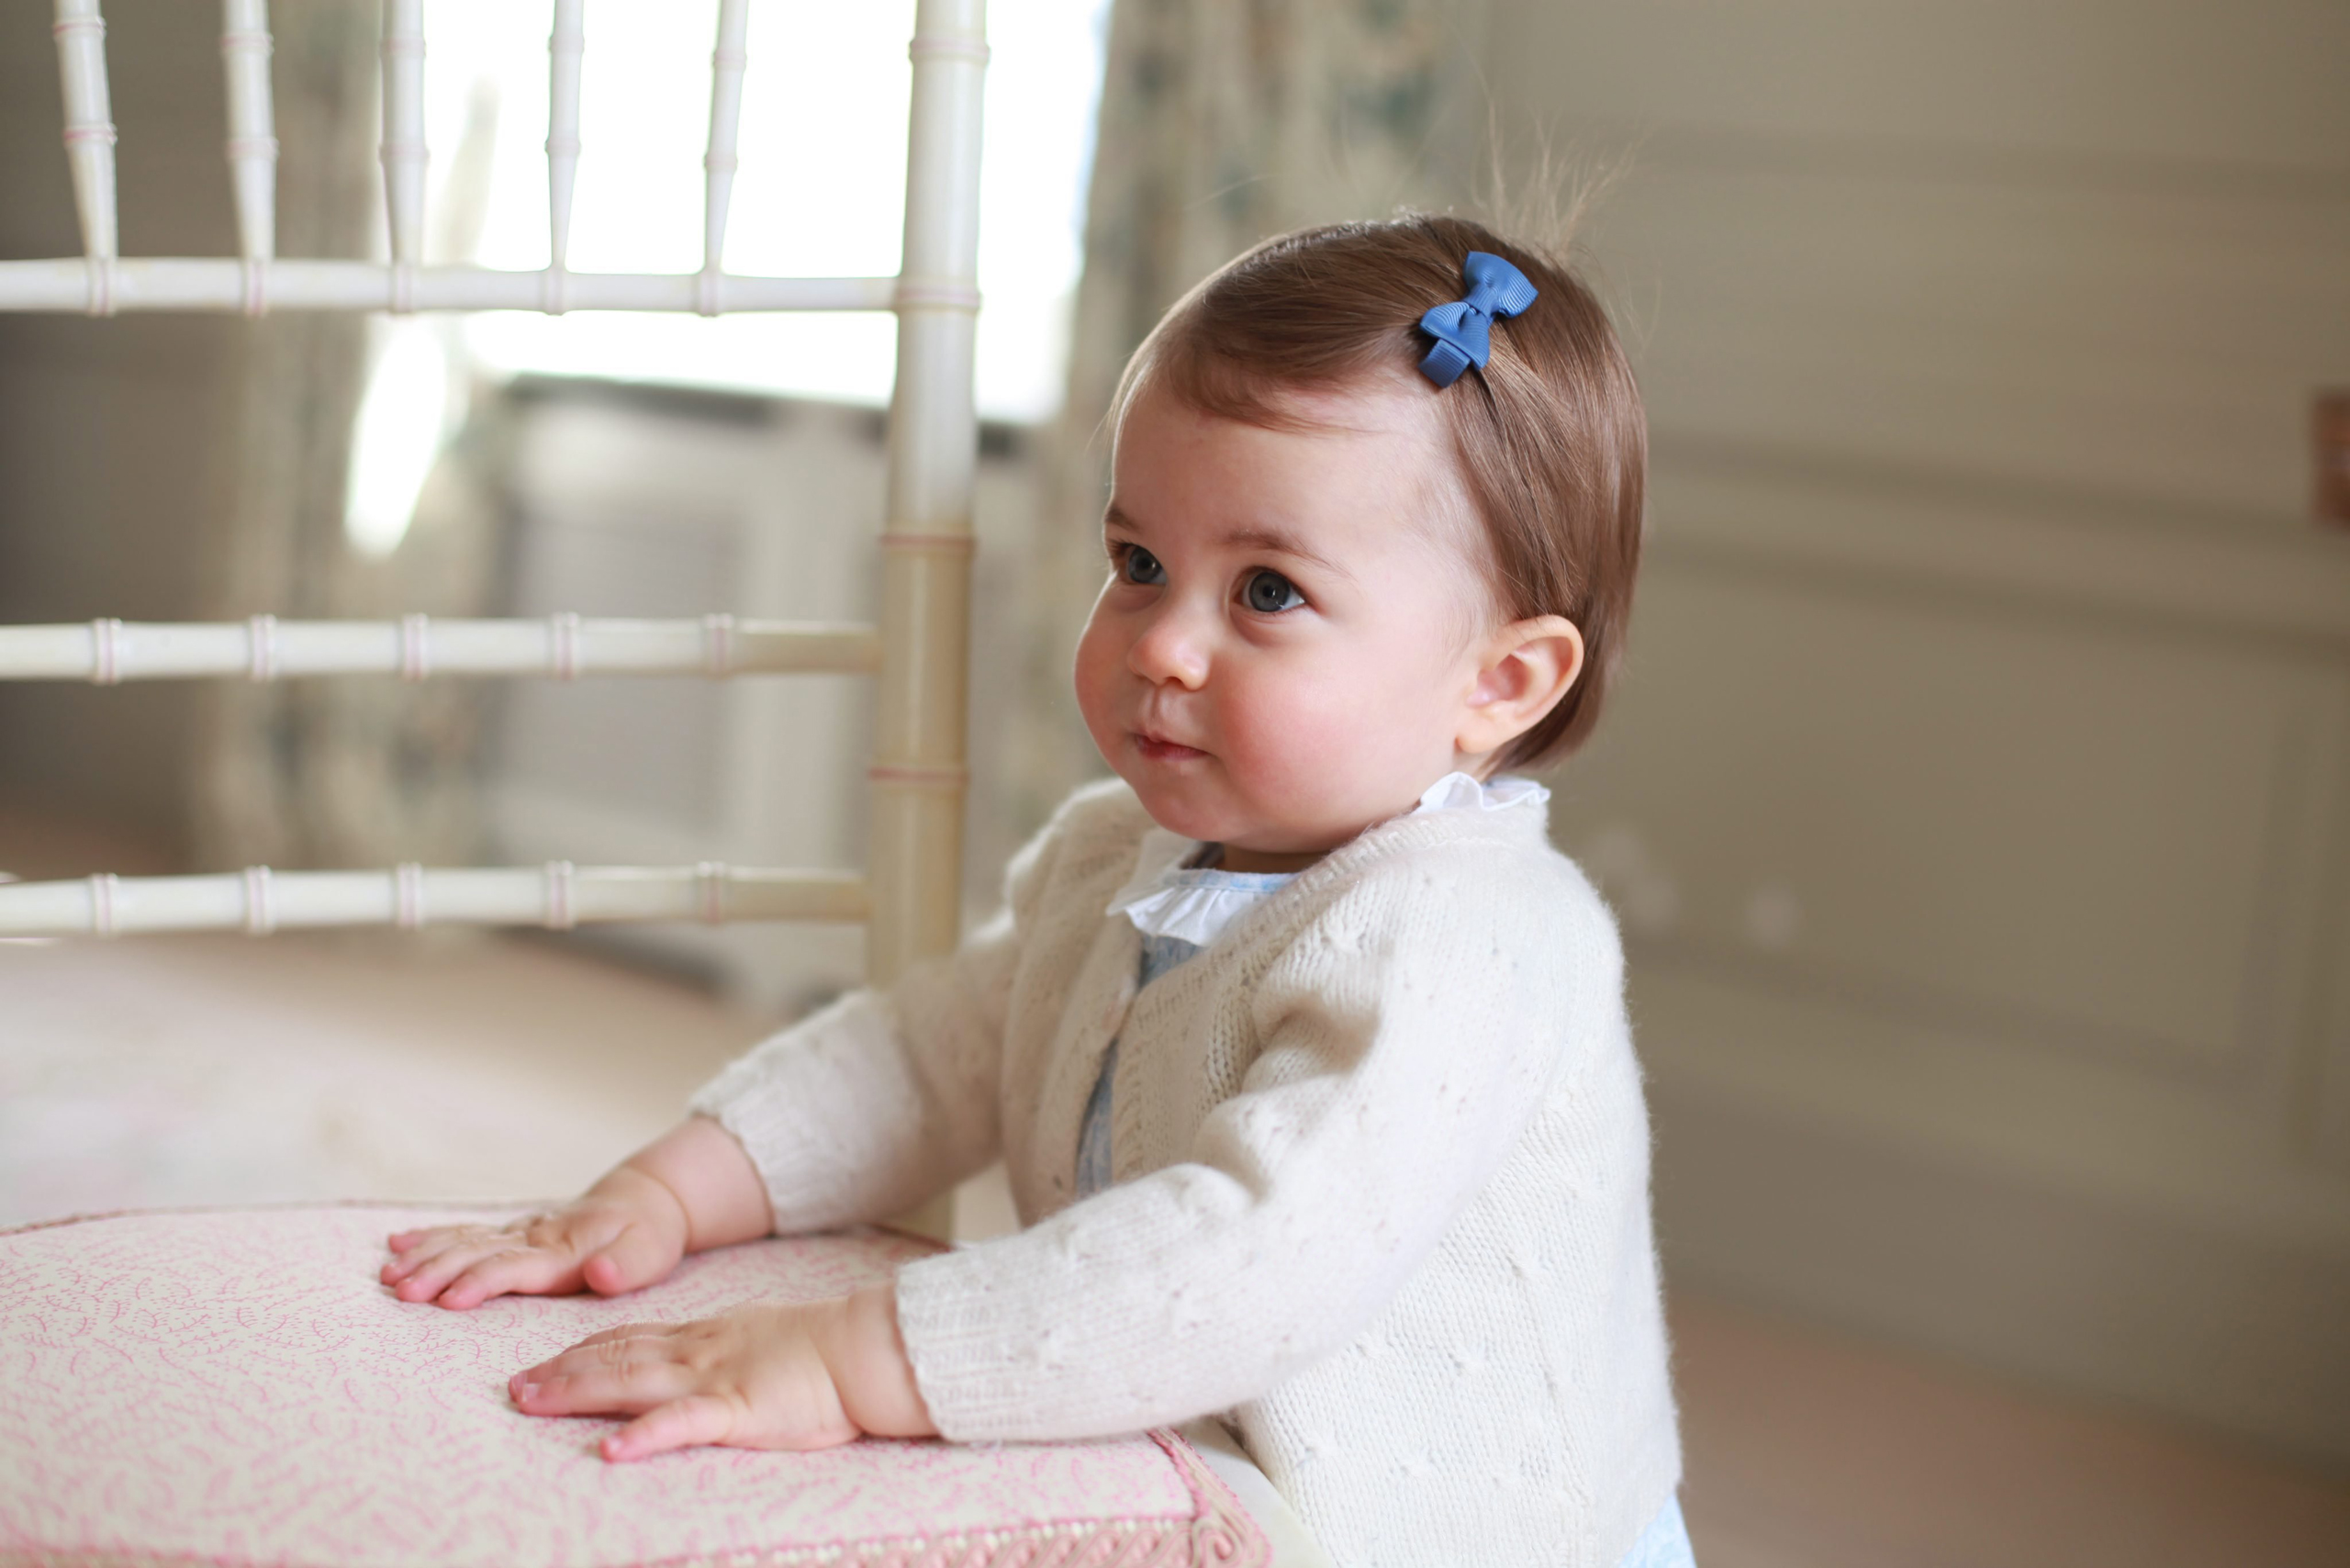 Princess Charlotte at Anmer Hall in Norfolk, U.K., in a photo made available by the Duke and Duchess of Cambridge on May 1, 2016. (Kensington Palace—EPA)